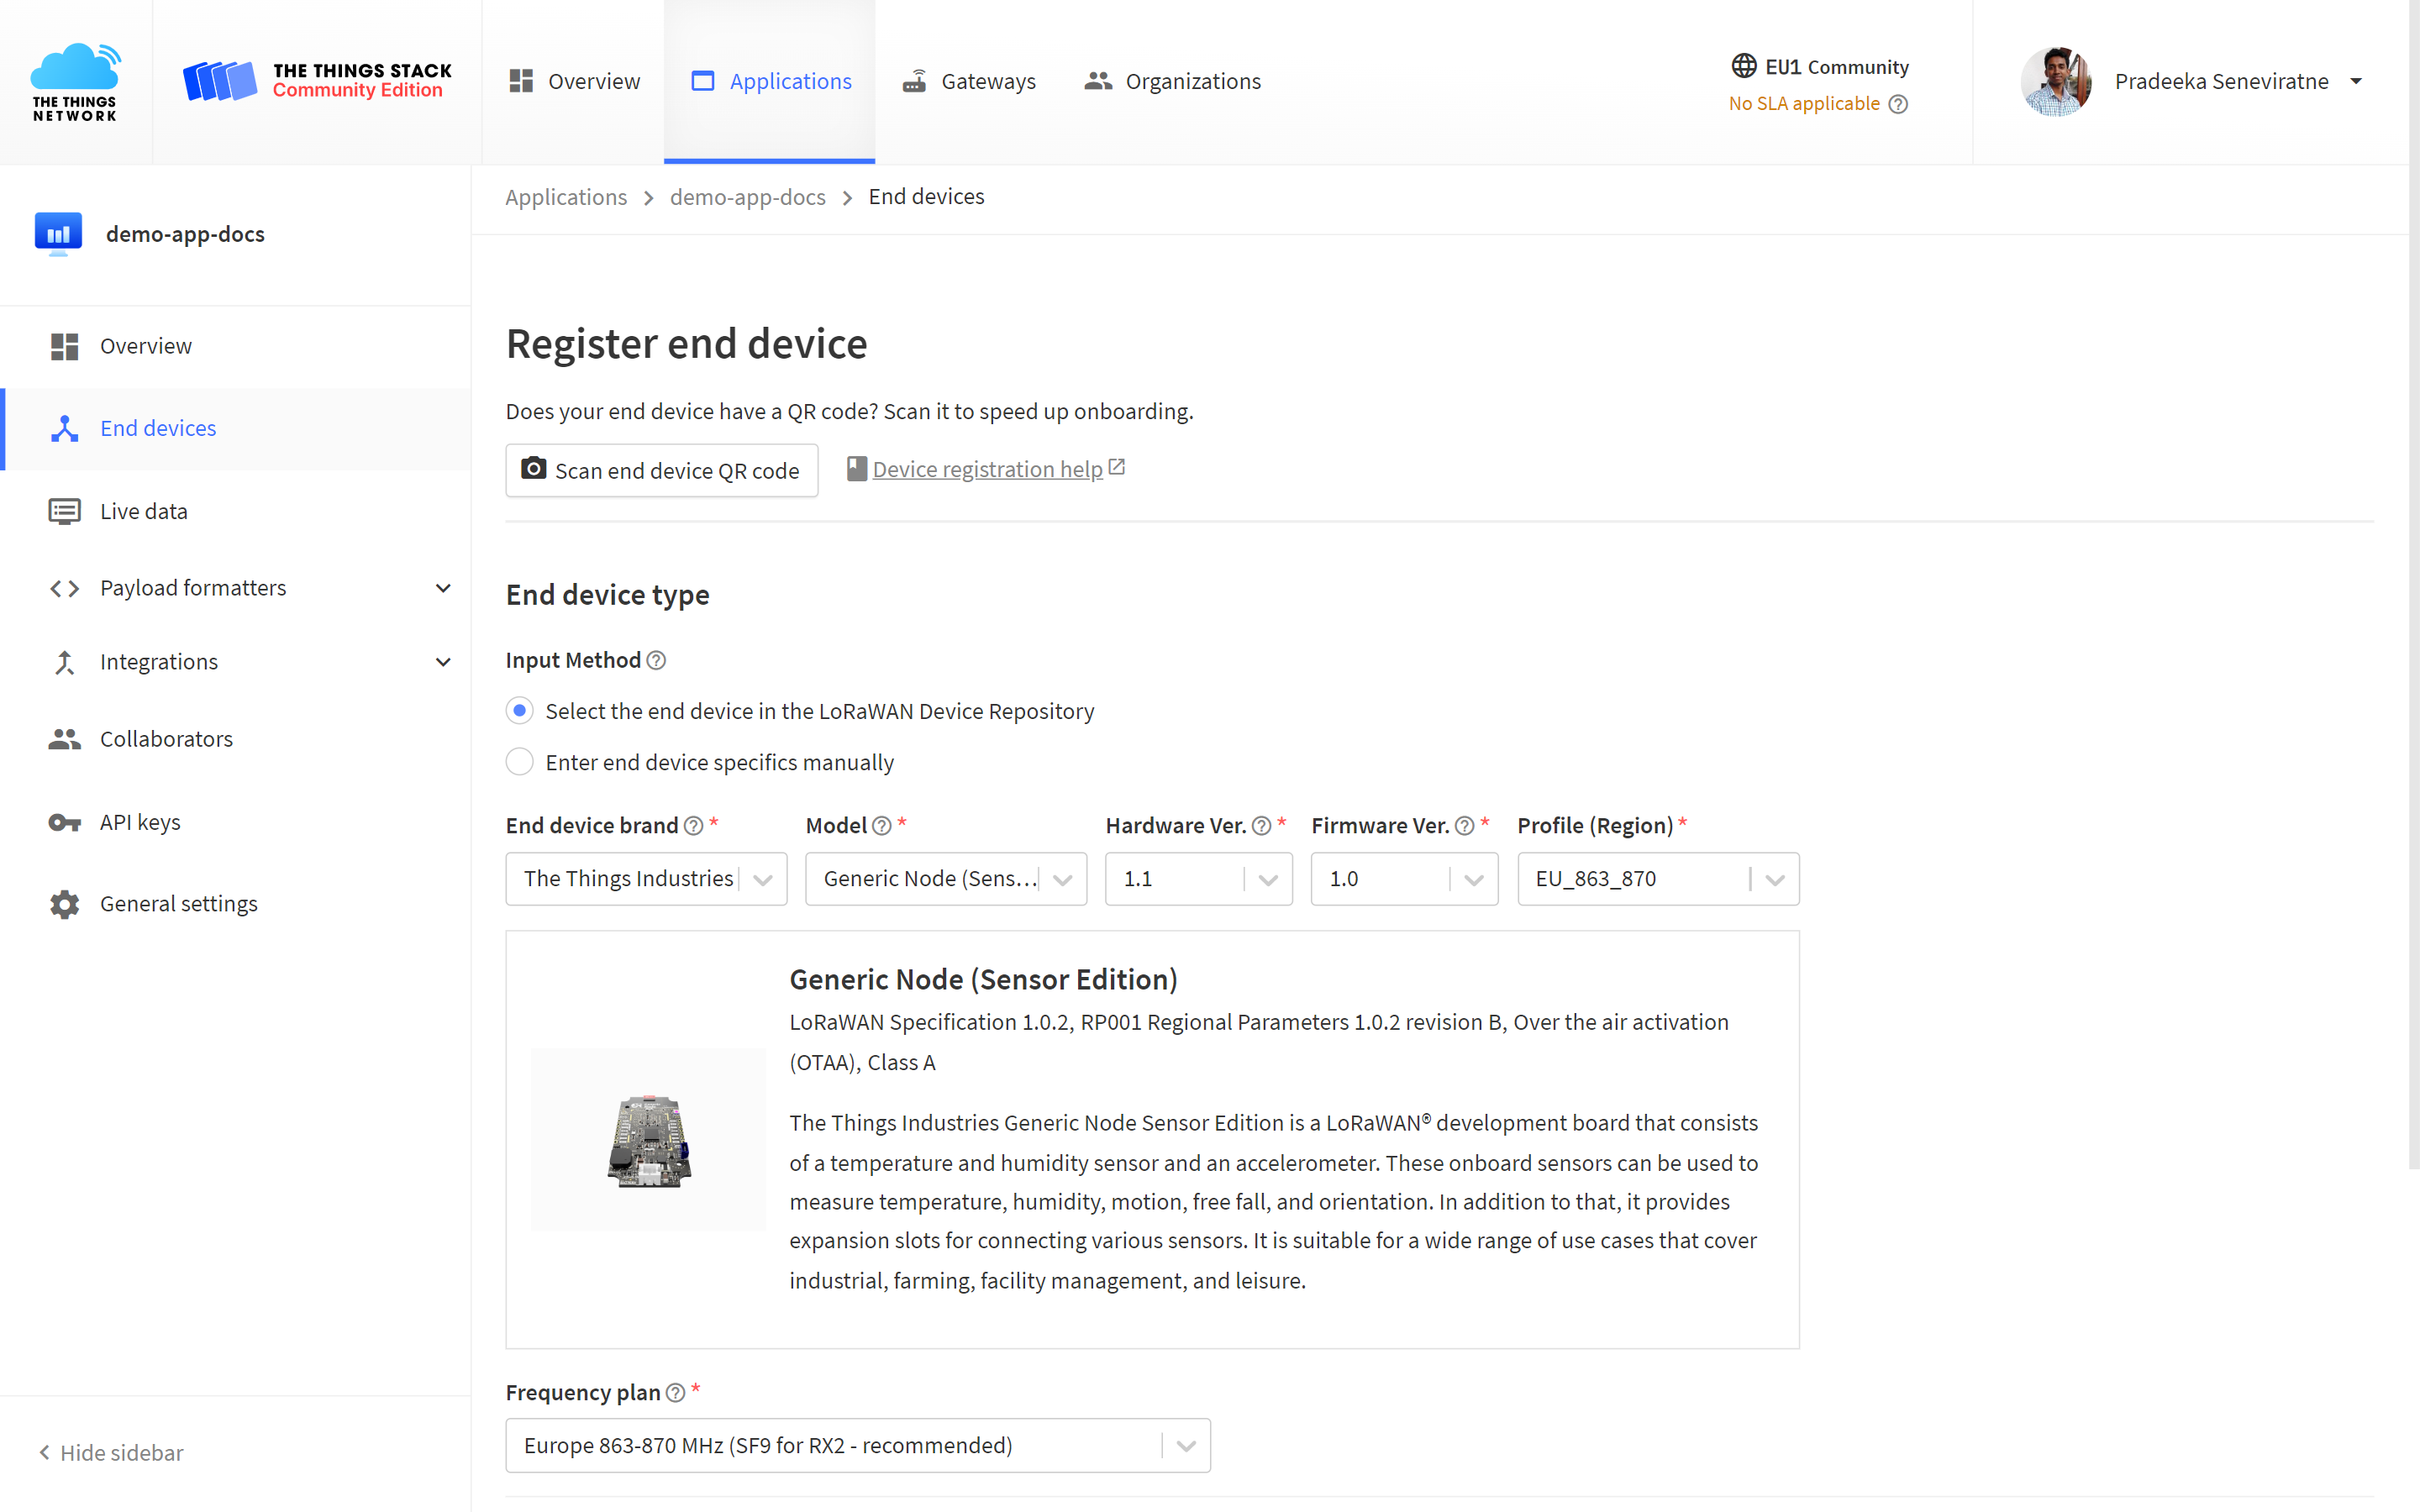 Settings for registration through device repository